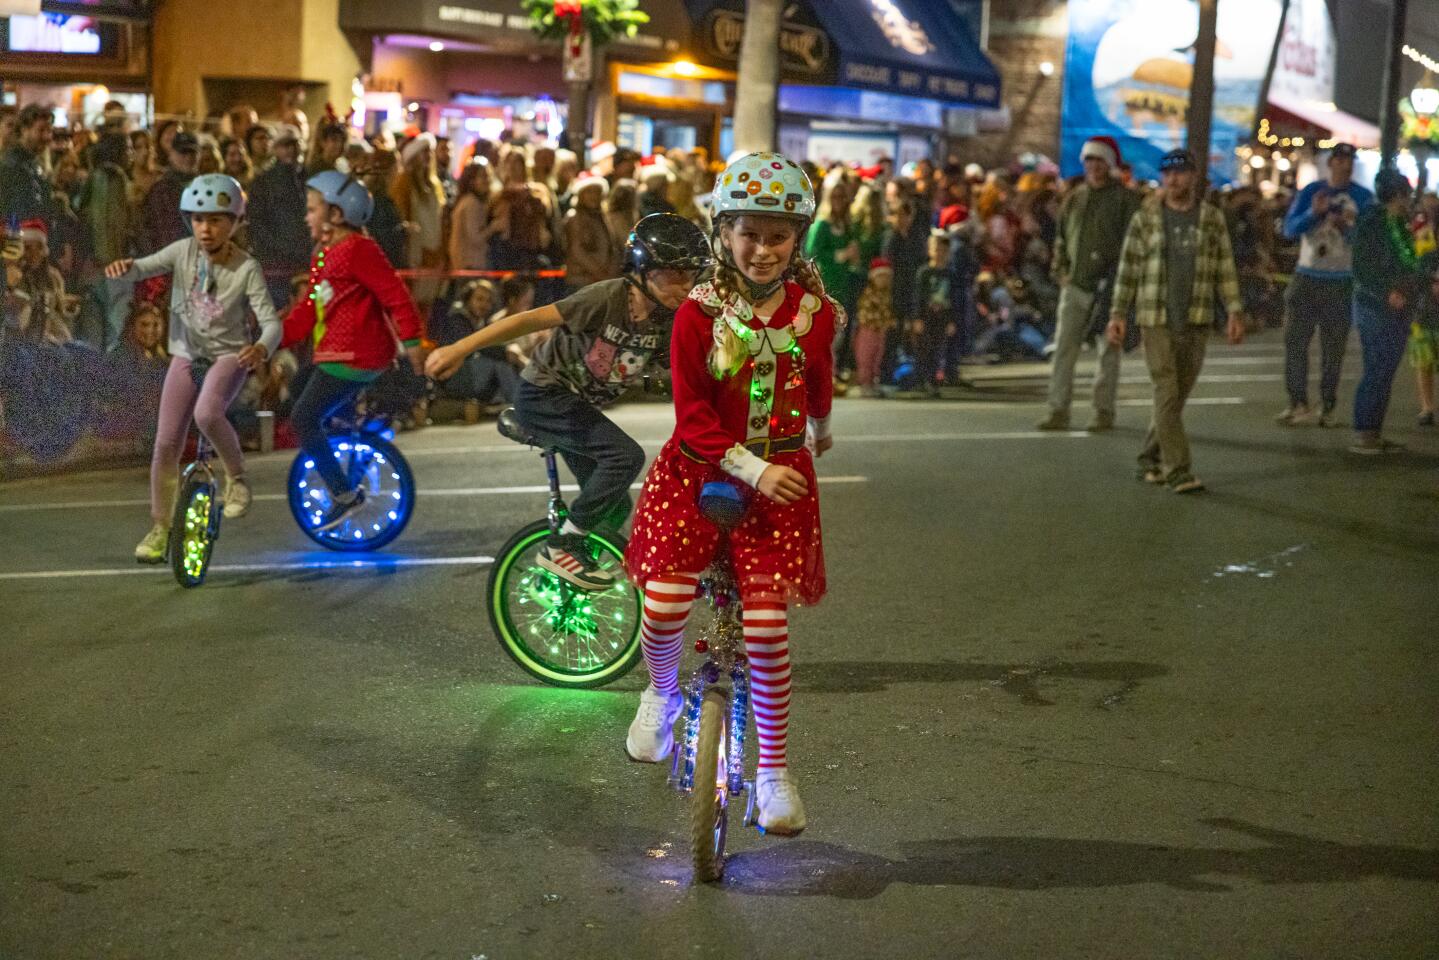 Ocean Beach Holiday Parade lights up the coast Point Loma & OB Monthly